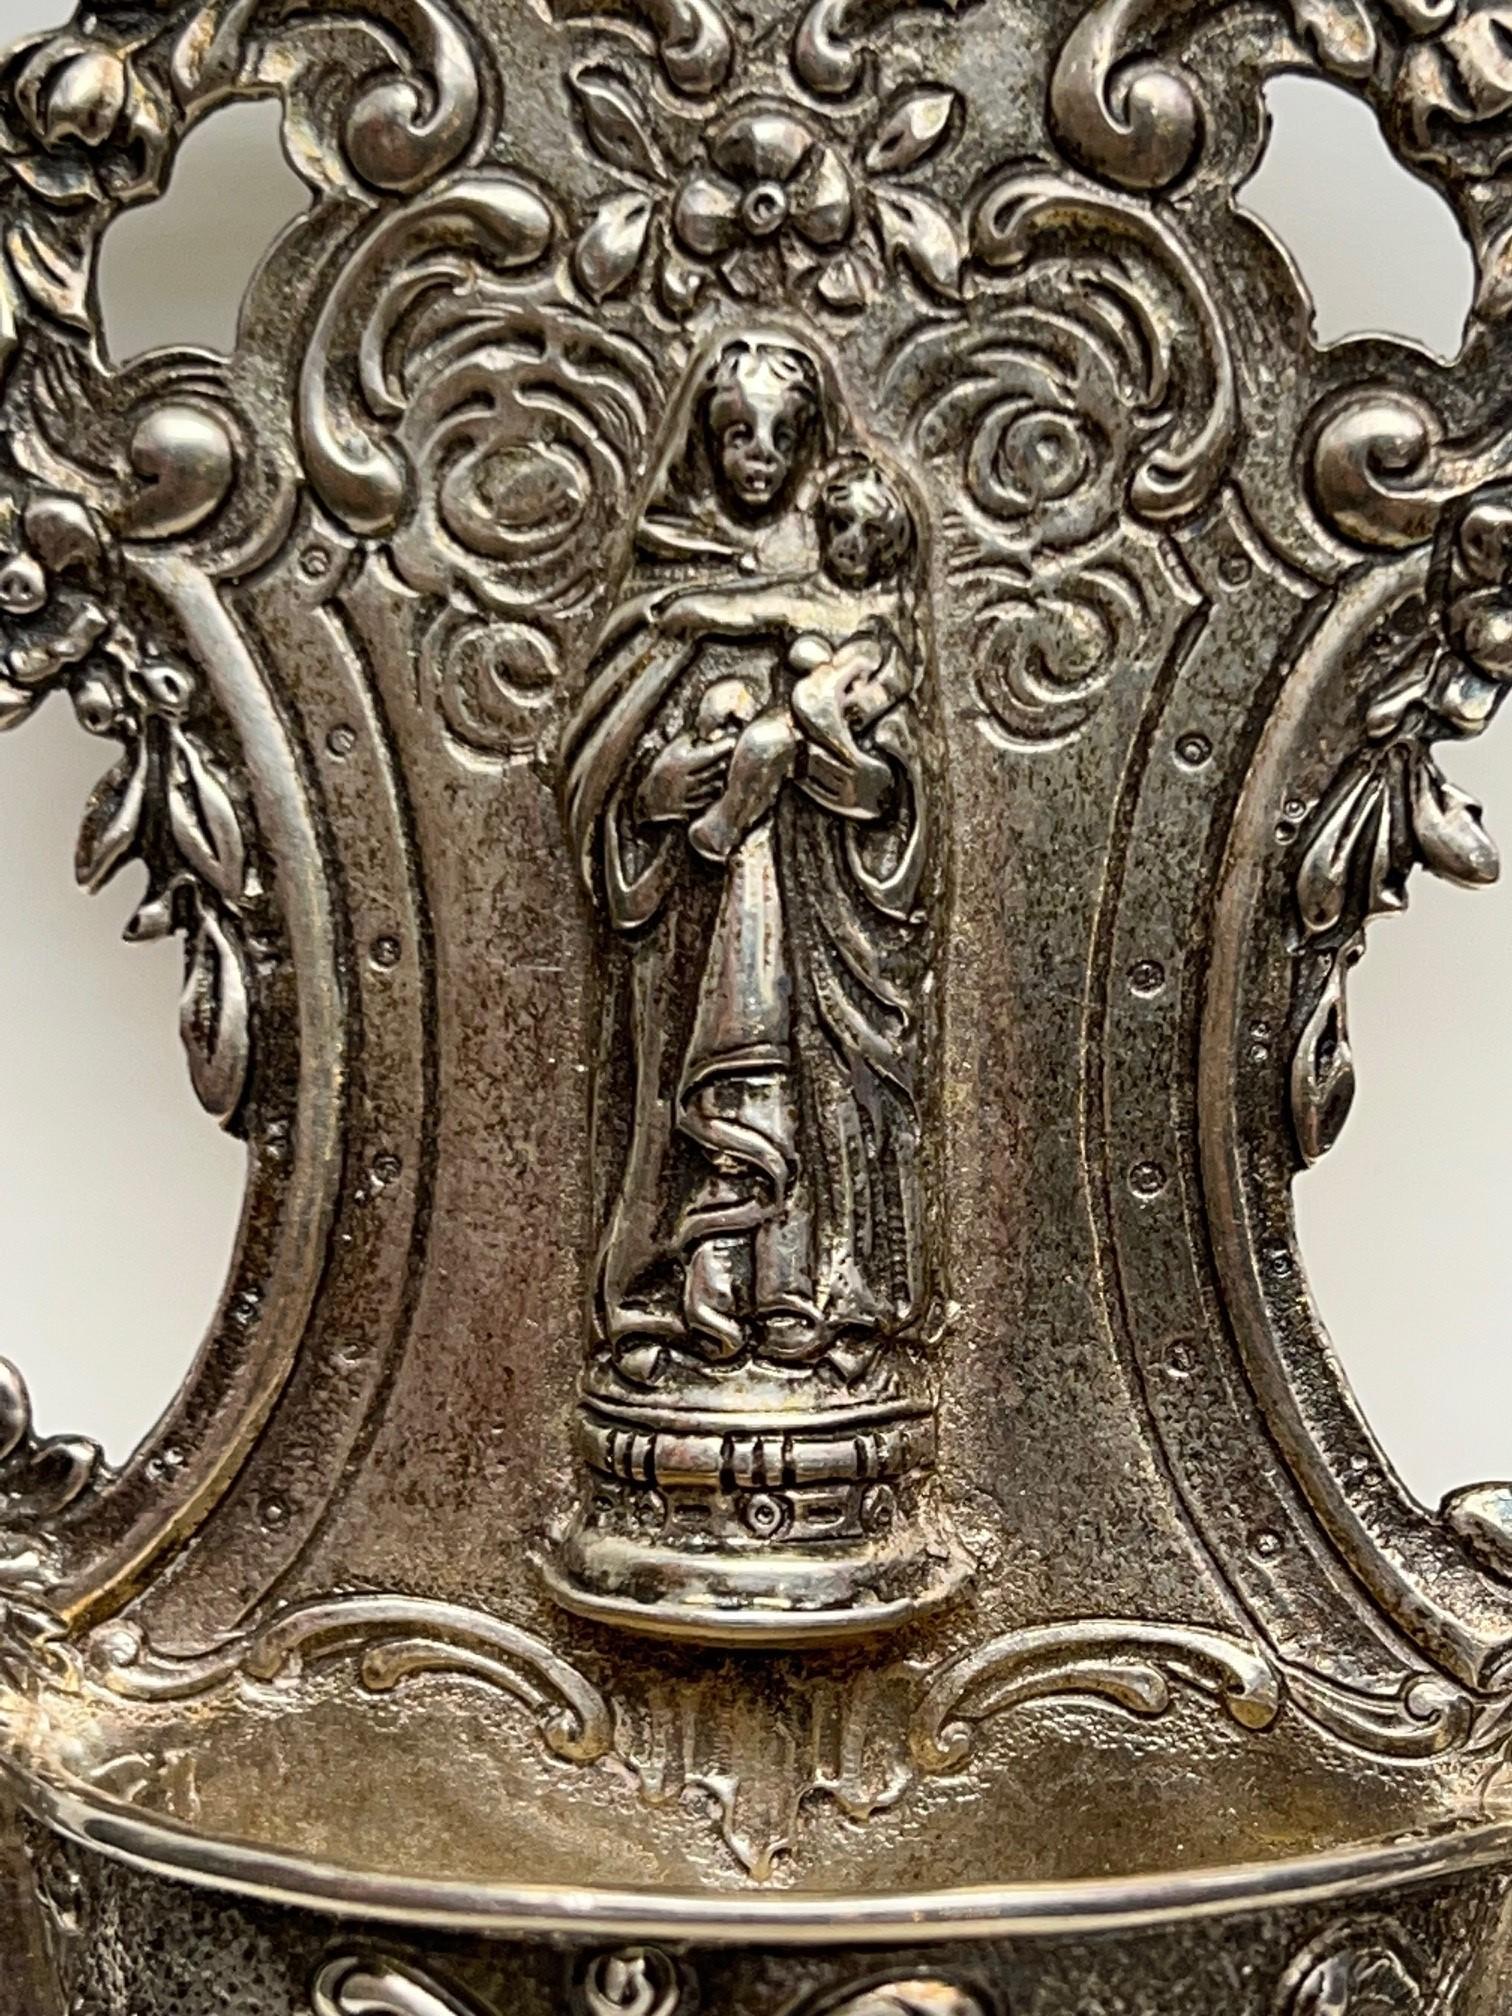 Beautiful mid-20th century ornate sterling silver holy water font with Madonna and Child by the Cini Foundry. The company was founded by Guglielmo Cini who was an Italian jewelry maker. Guglielmo came to the United States in 1922 and set up a shop